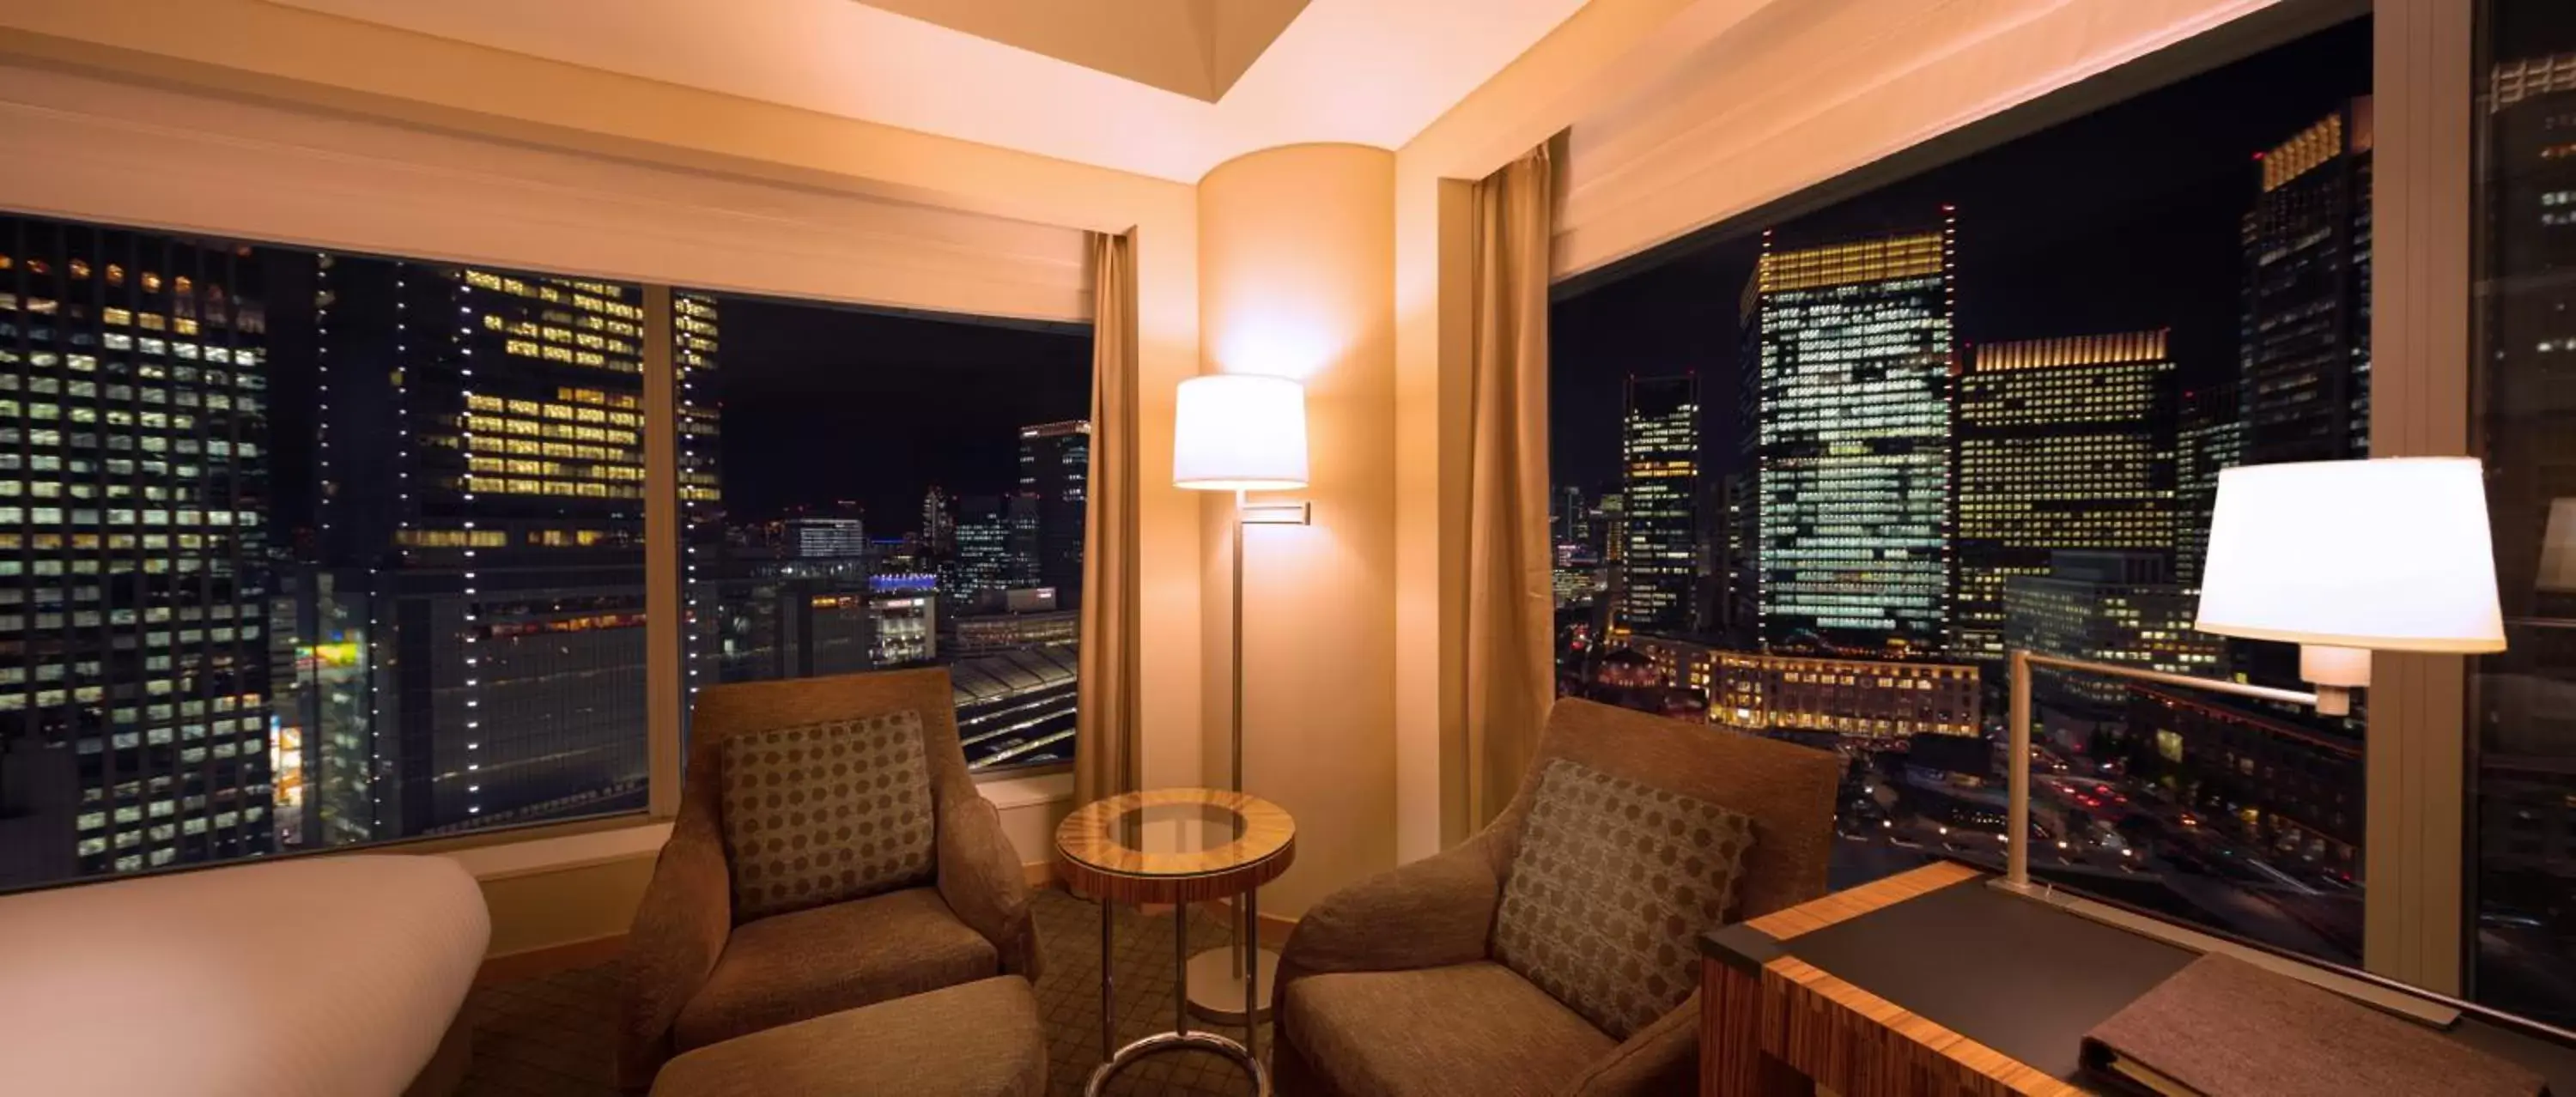 View (from property/room) in Marunouchi Hotel